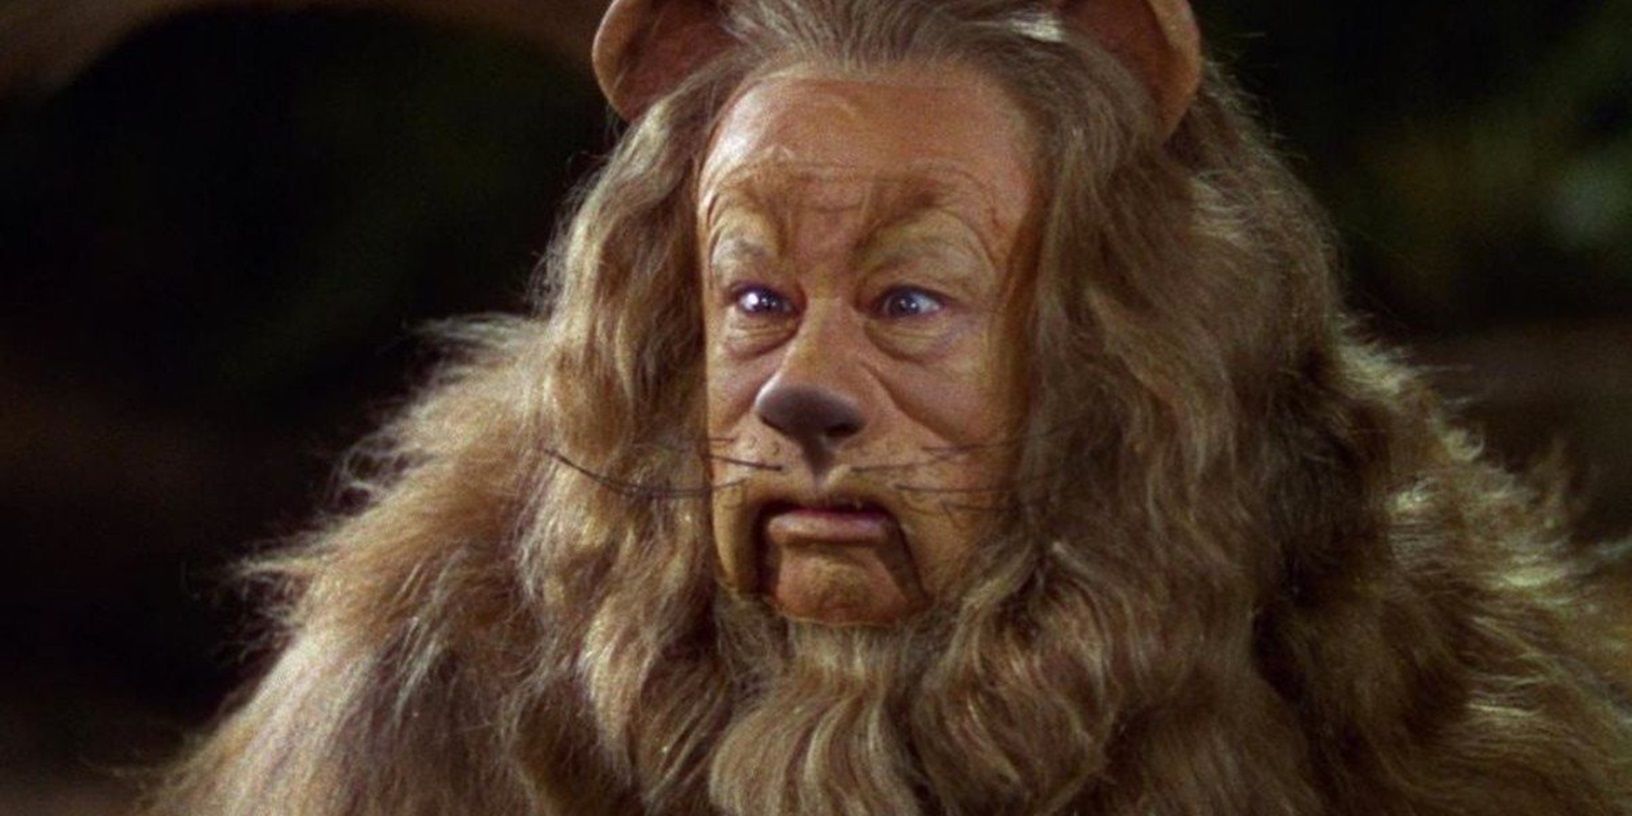 The Cowardly Lion (Bert Lahr) looking scared in The Wizard of Oz